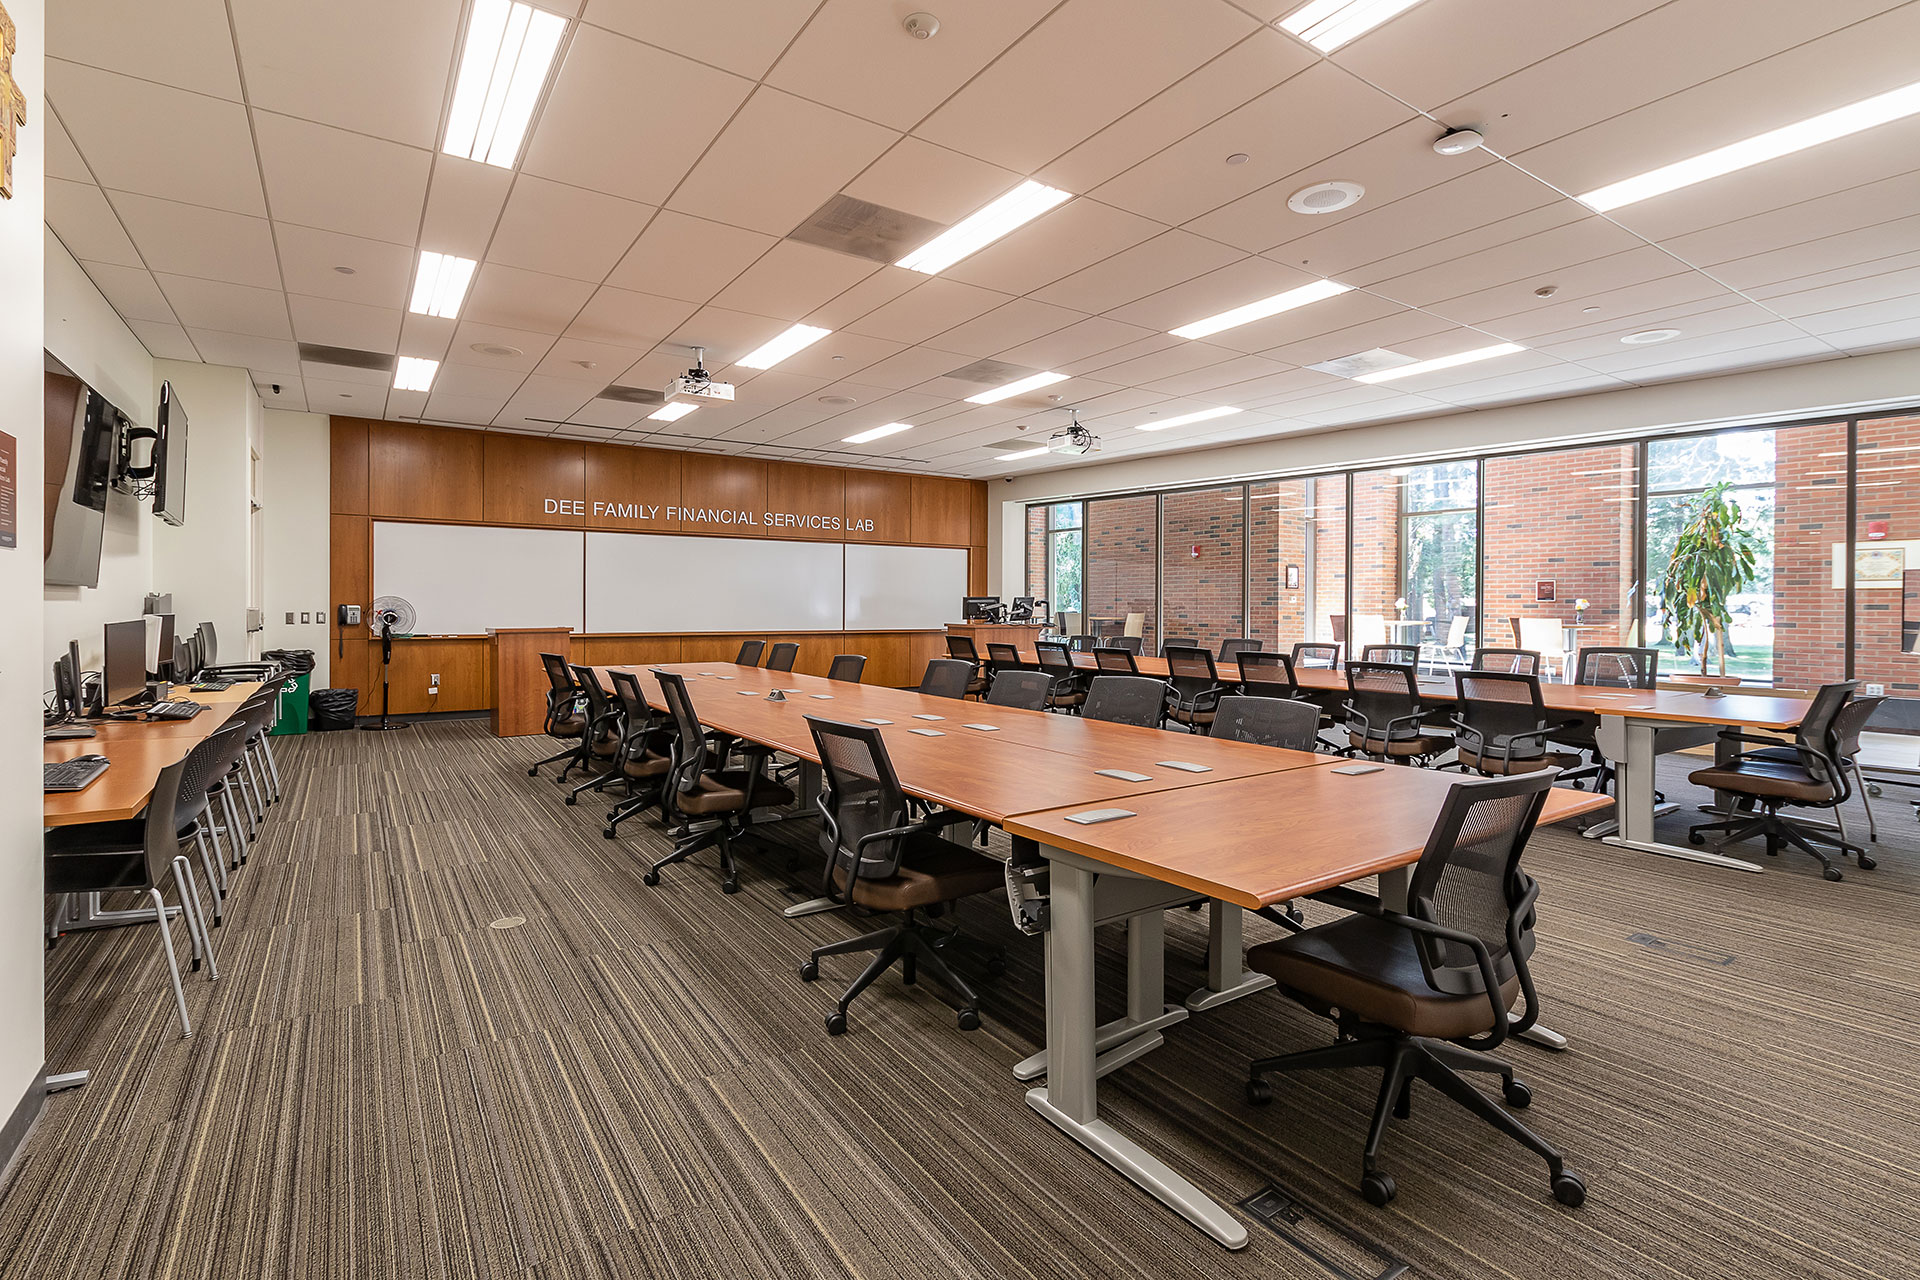 Dee Financial Services Lab | Conference Room Rentals | Corporate Conference Venues | Small Event Spaces